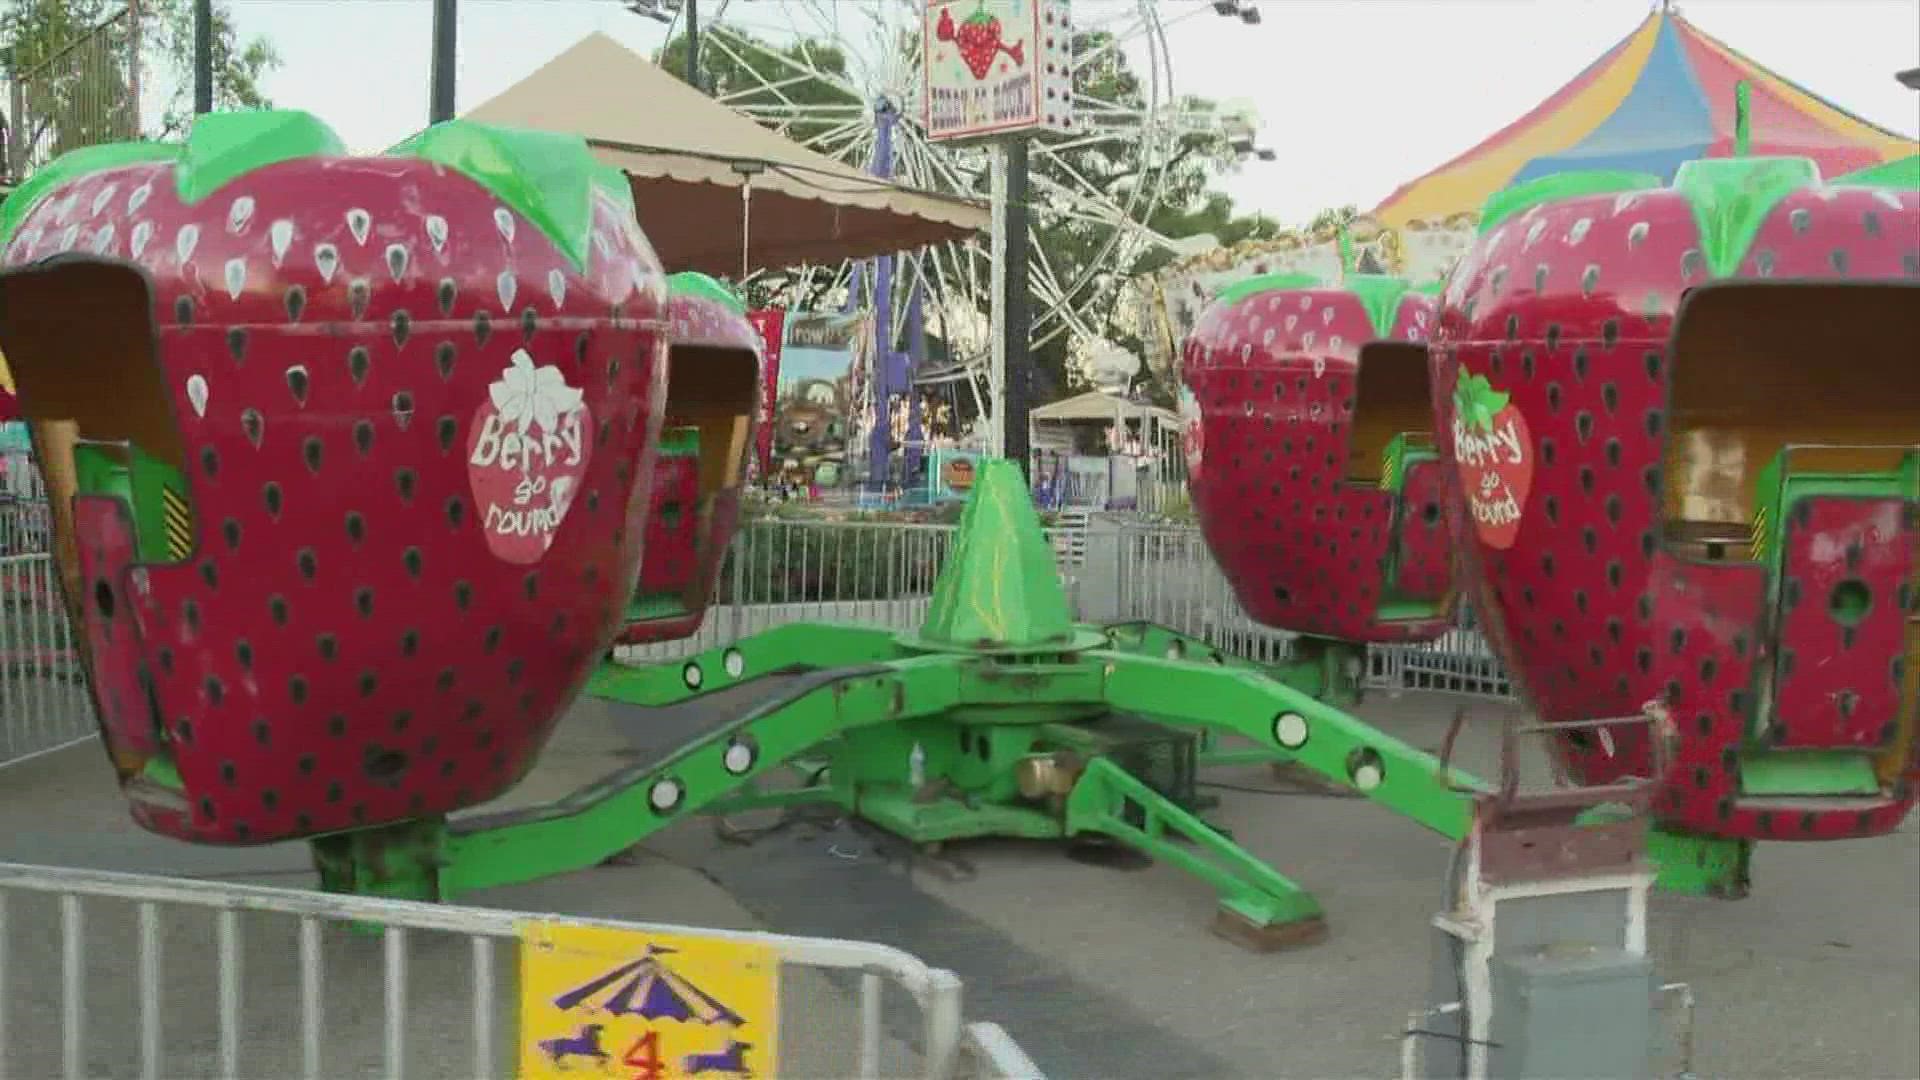 The fair was canceled for two years, in 2020 due to the pandemic and in 2021 as the fairgrounds were being used for firefighters battling the Caldor Fire.